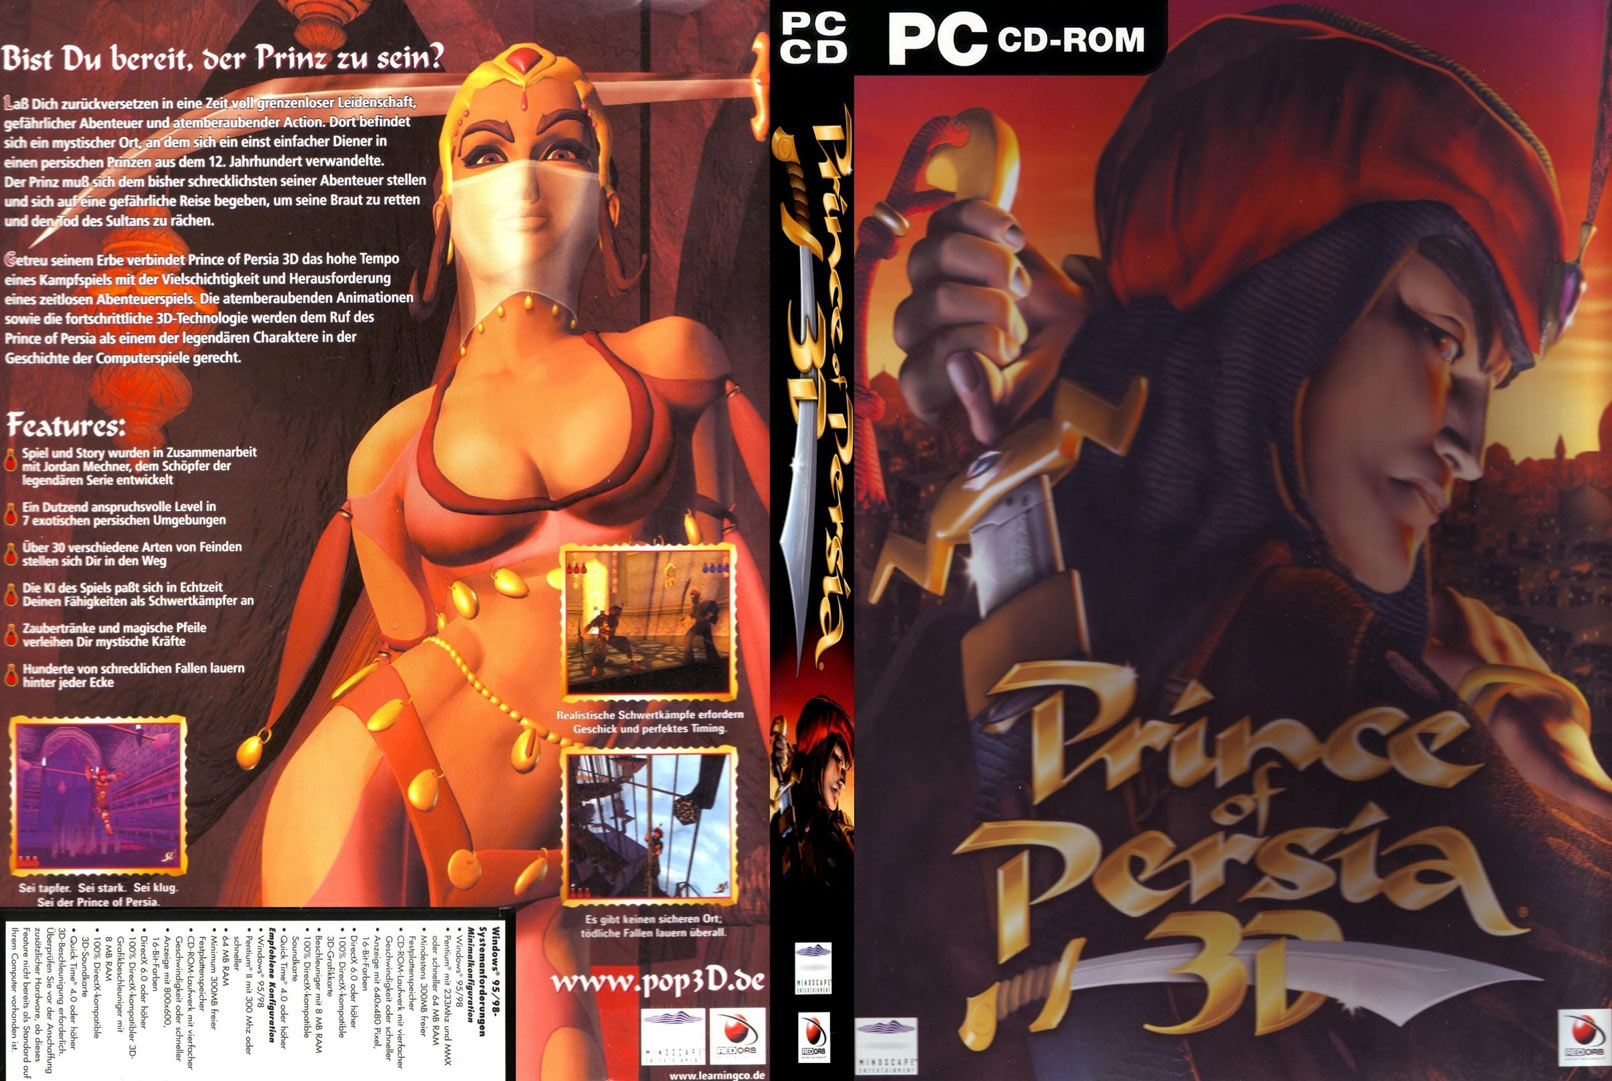 Prince of Persia 3D - DVD obal